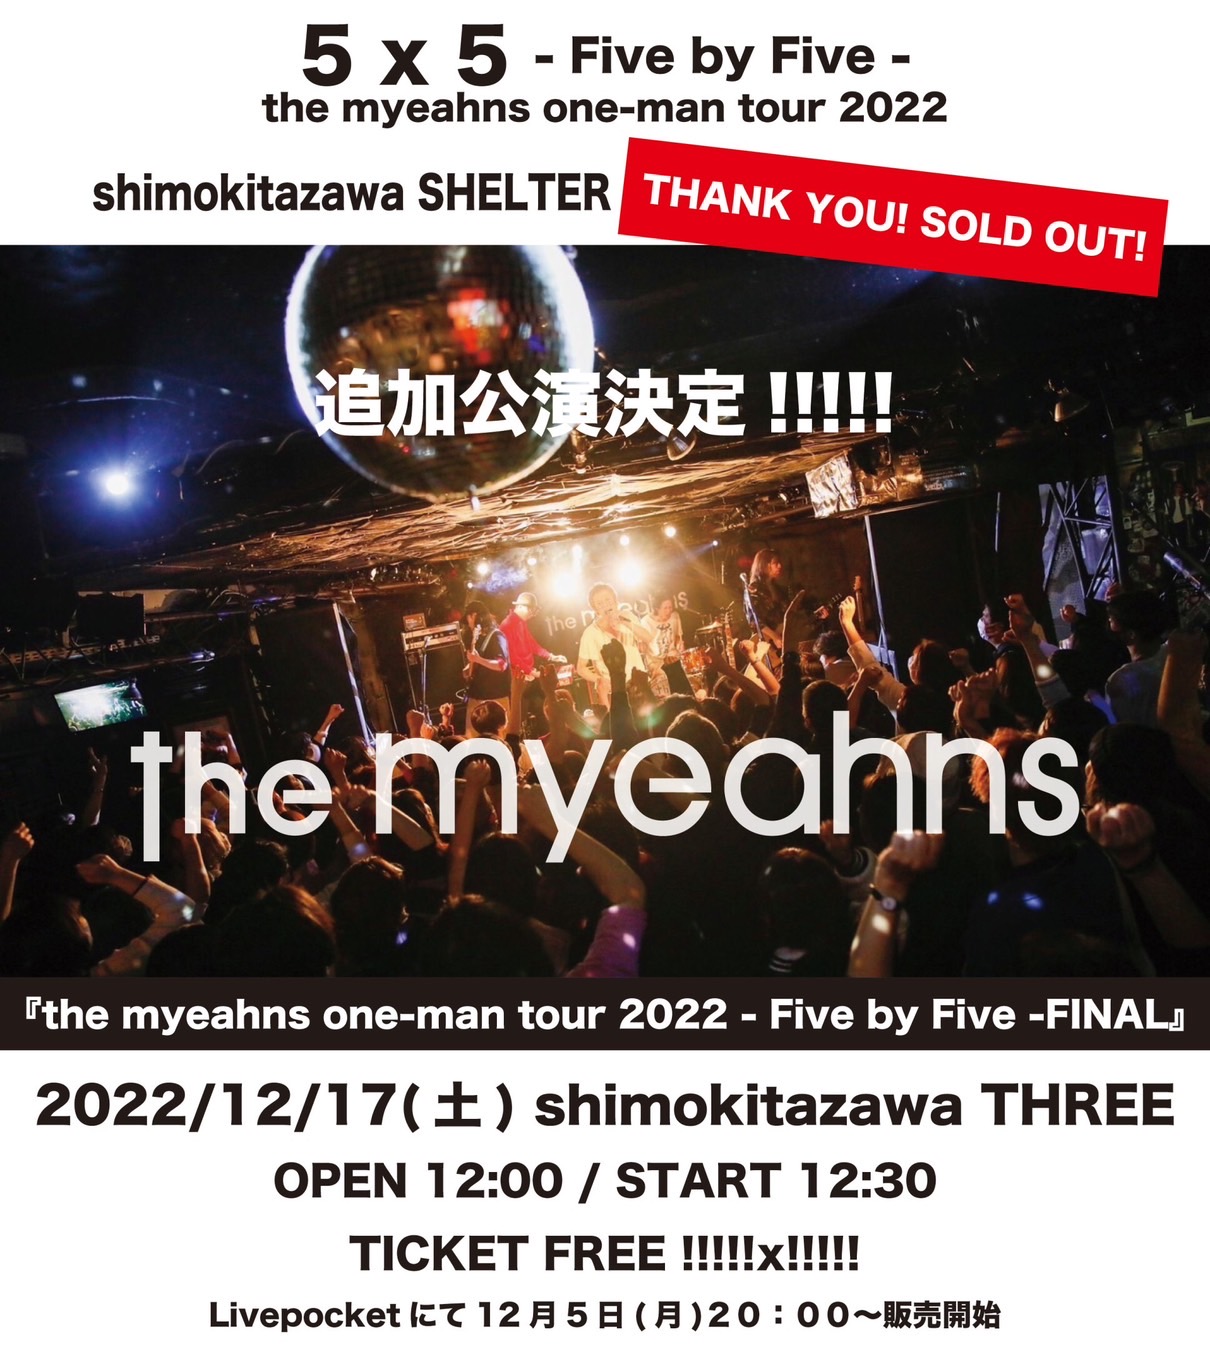 the myeahns one-man tour 2022 - Five by Five - FINAL 追加公演